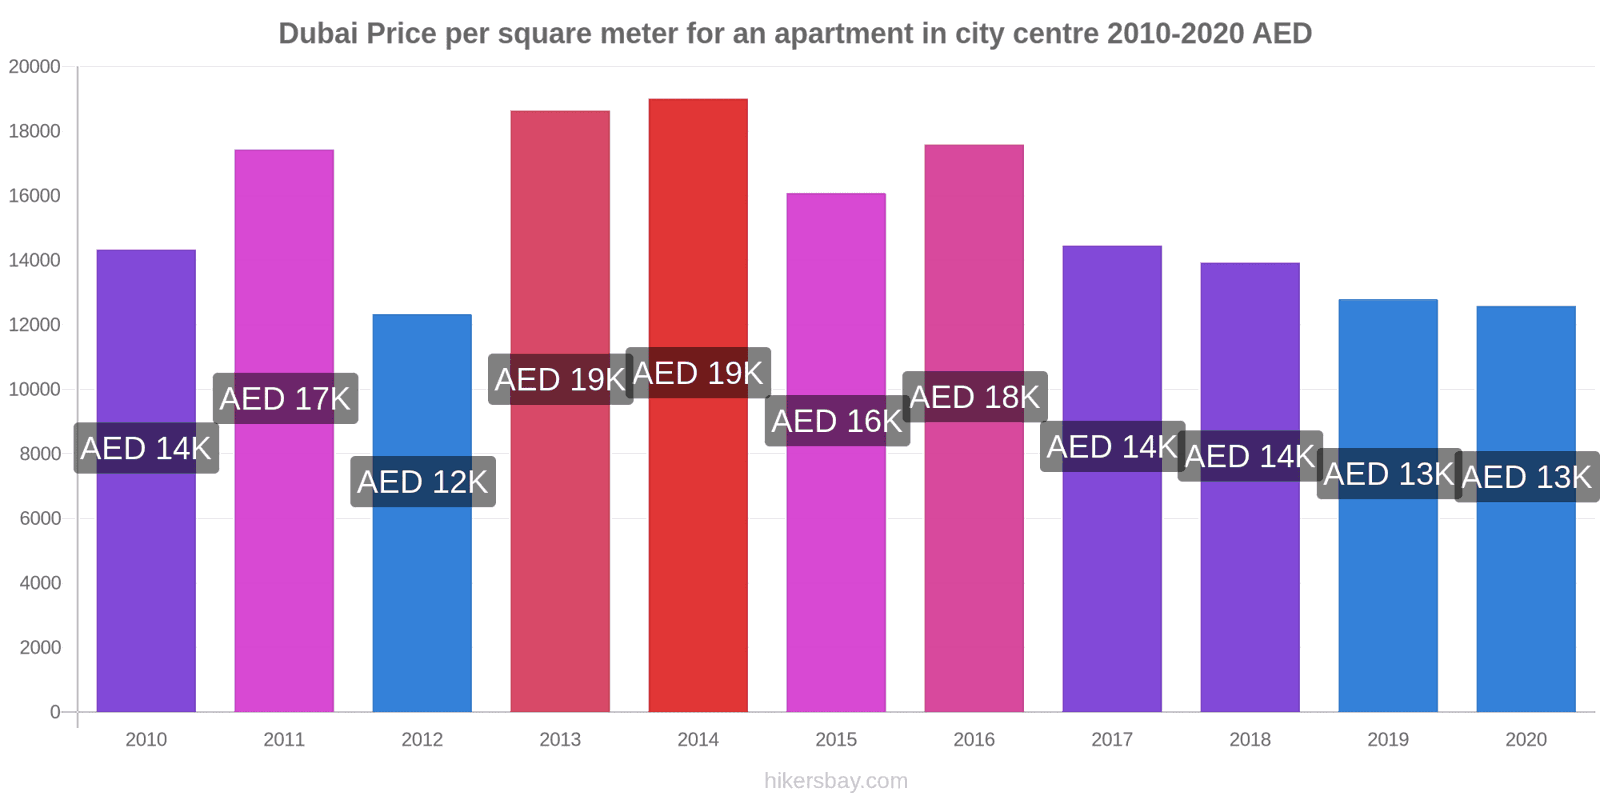 Dubai price changes Price per square meter for an apartment in city centre hikersbay.com